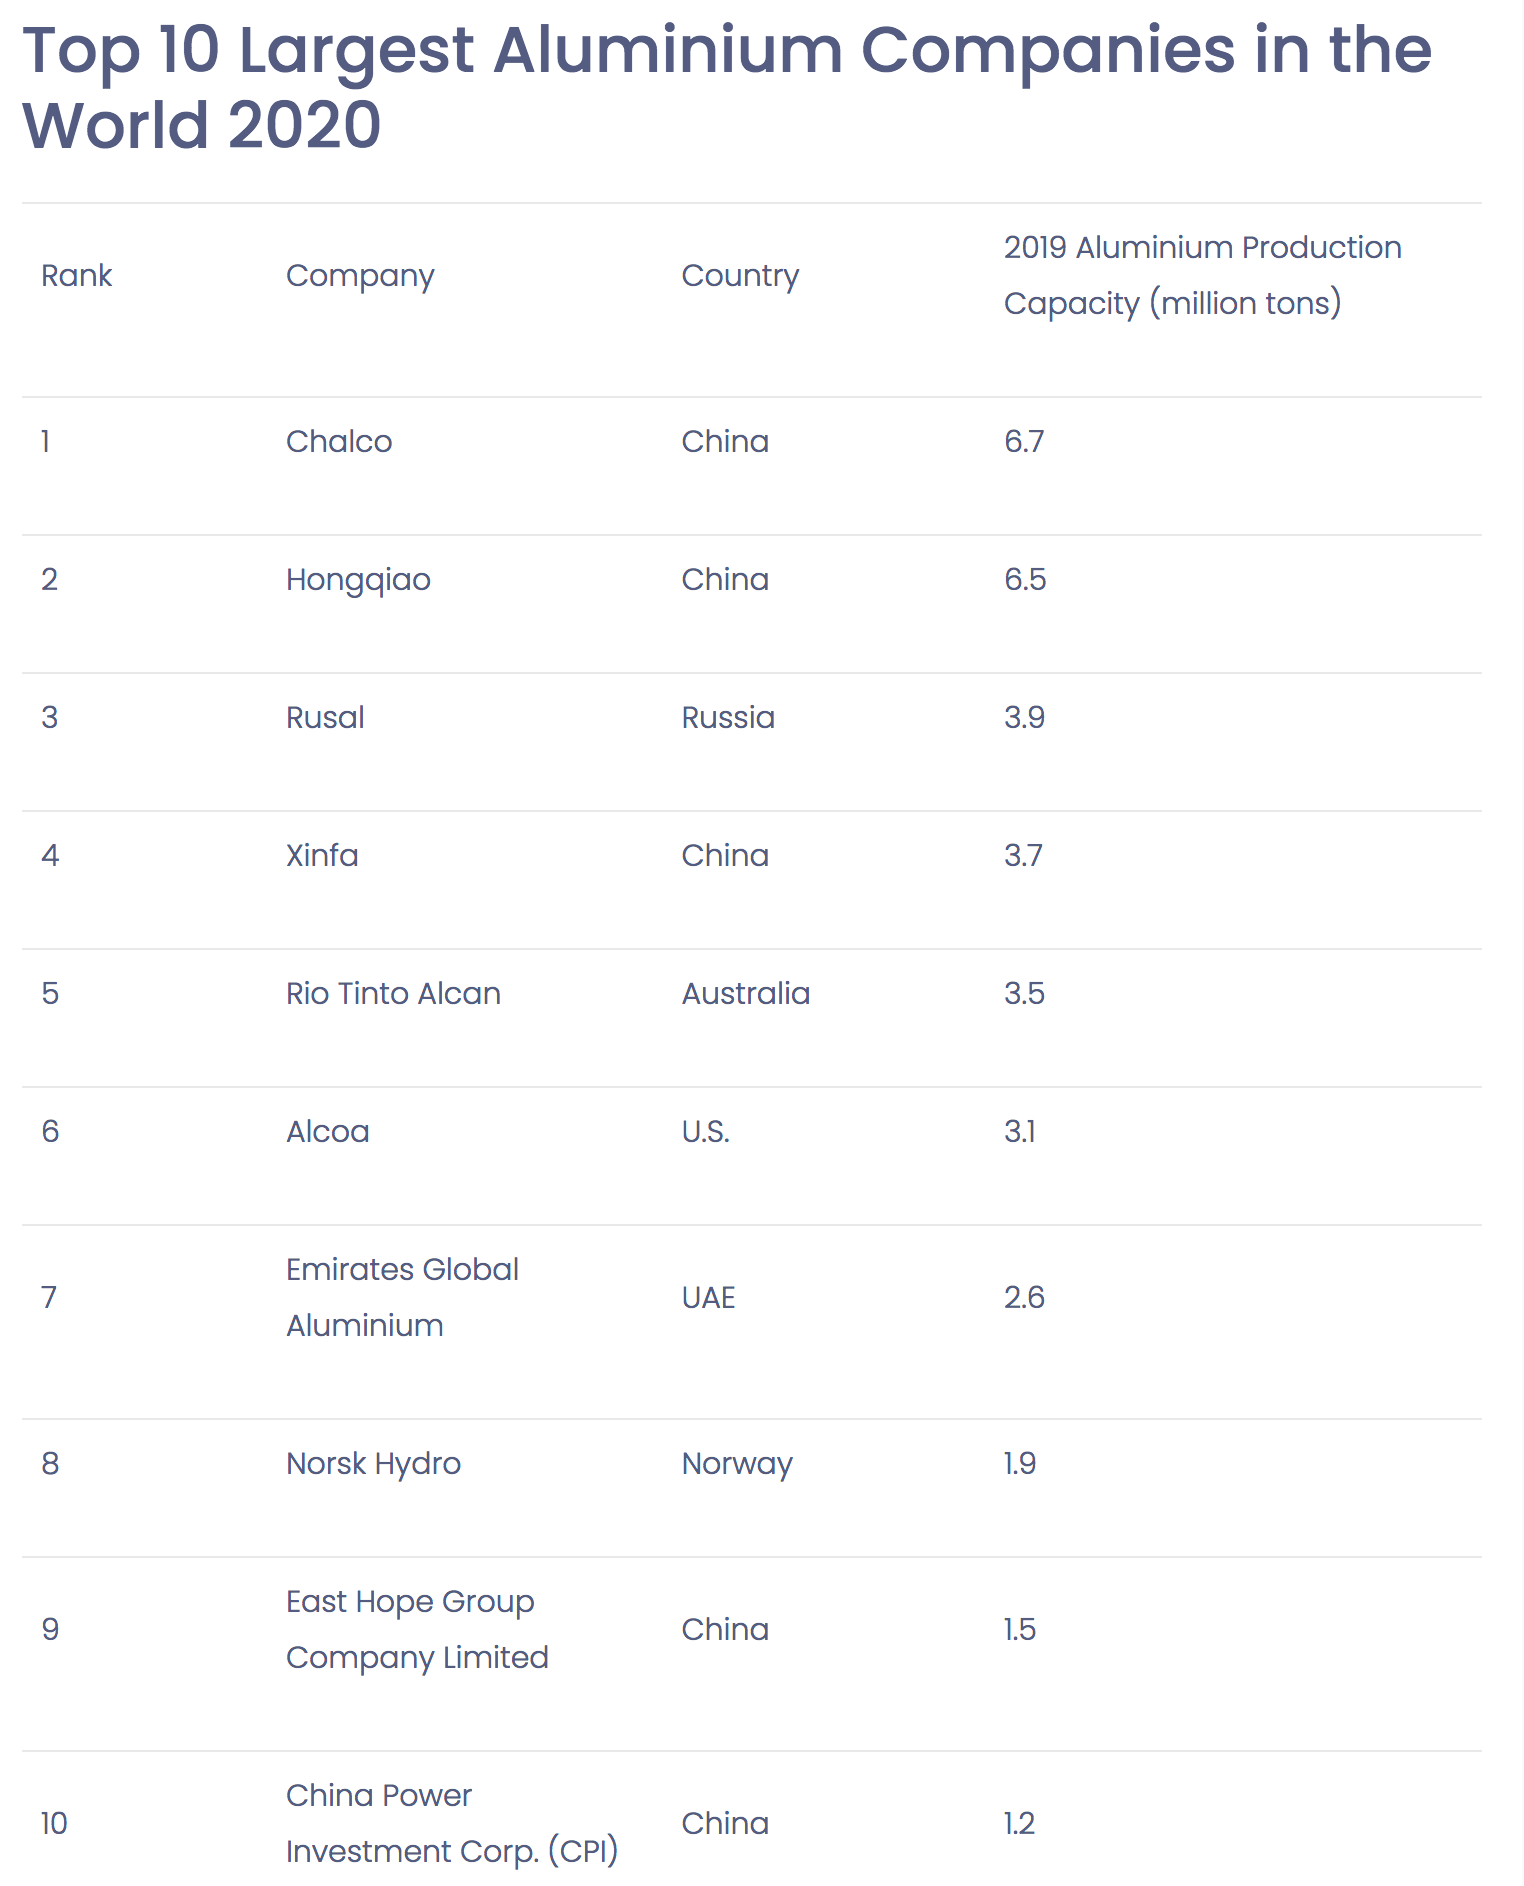 Top 10 Largest Aluminum Companies Globally